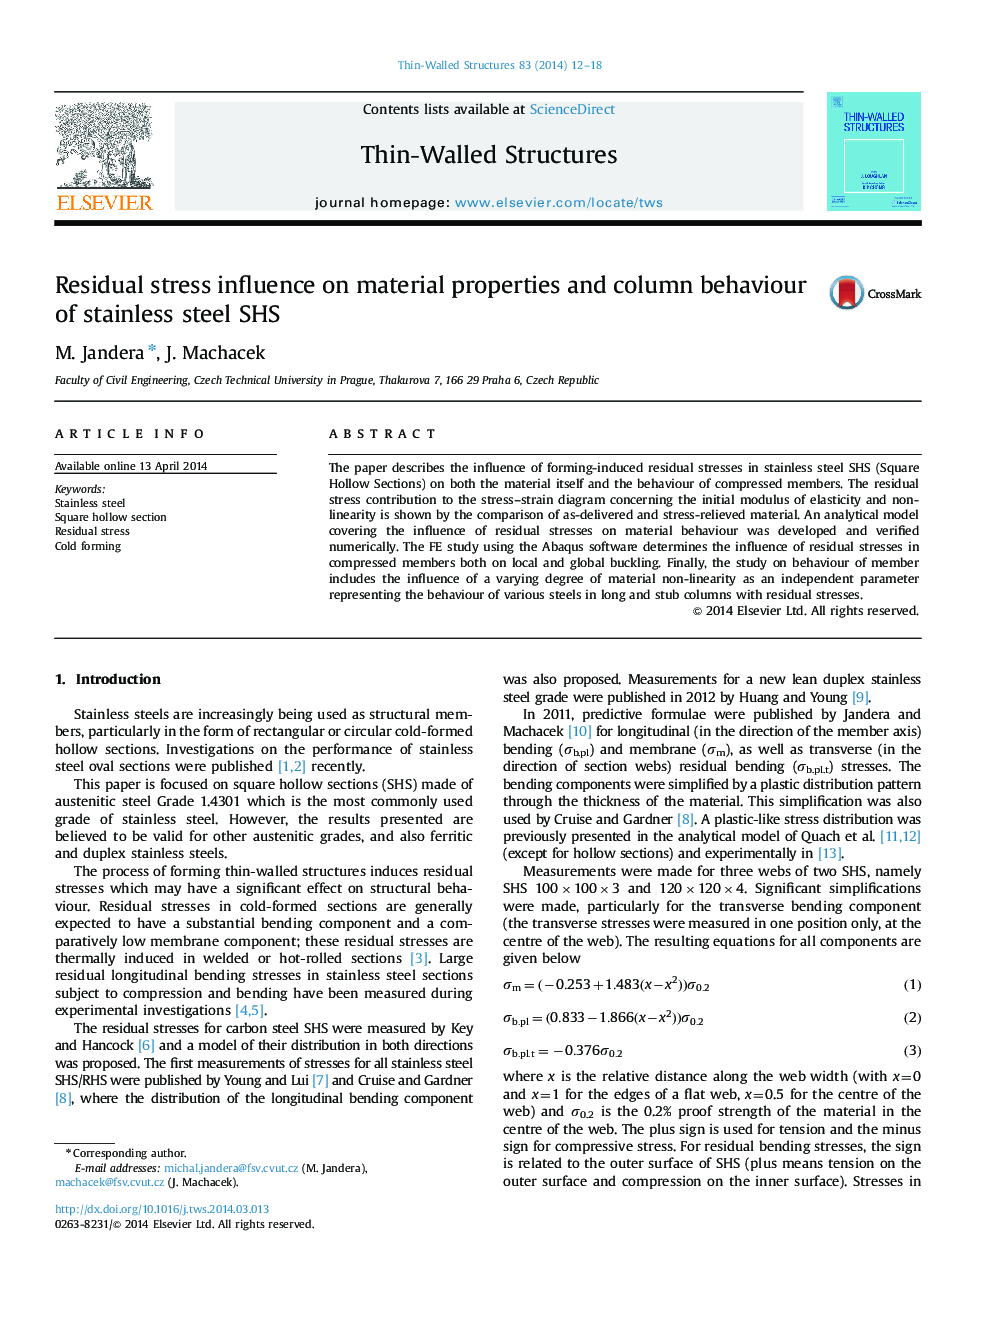 Residual stress influence on material properties and column behaviour of stainless steel SHS